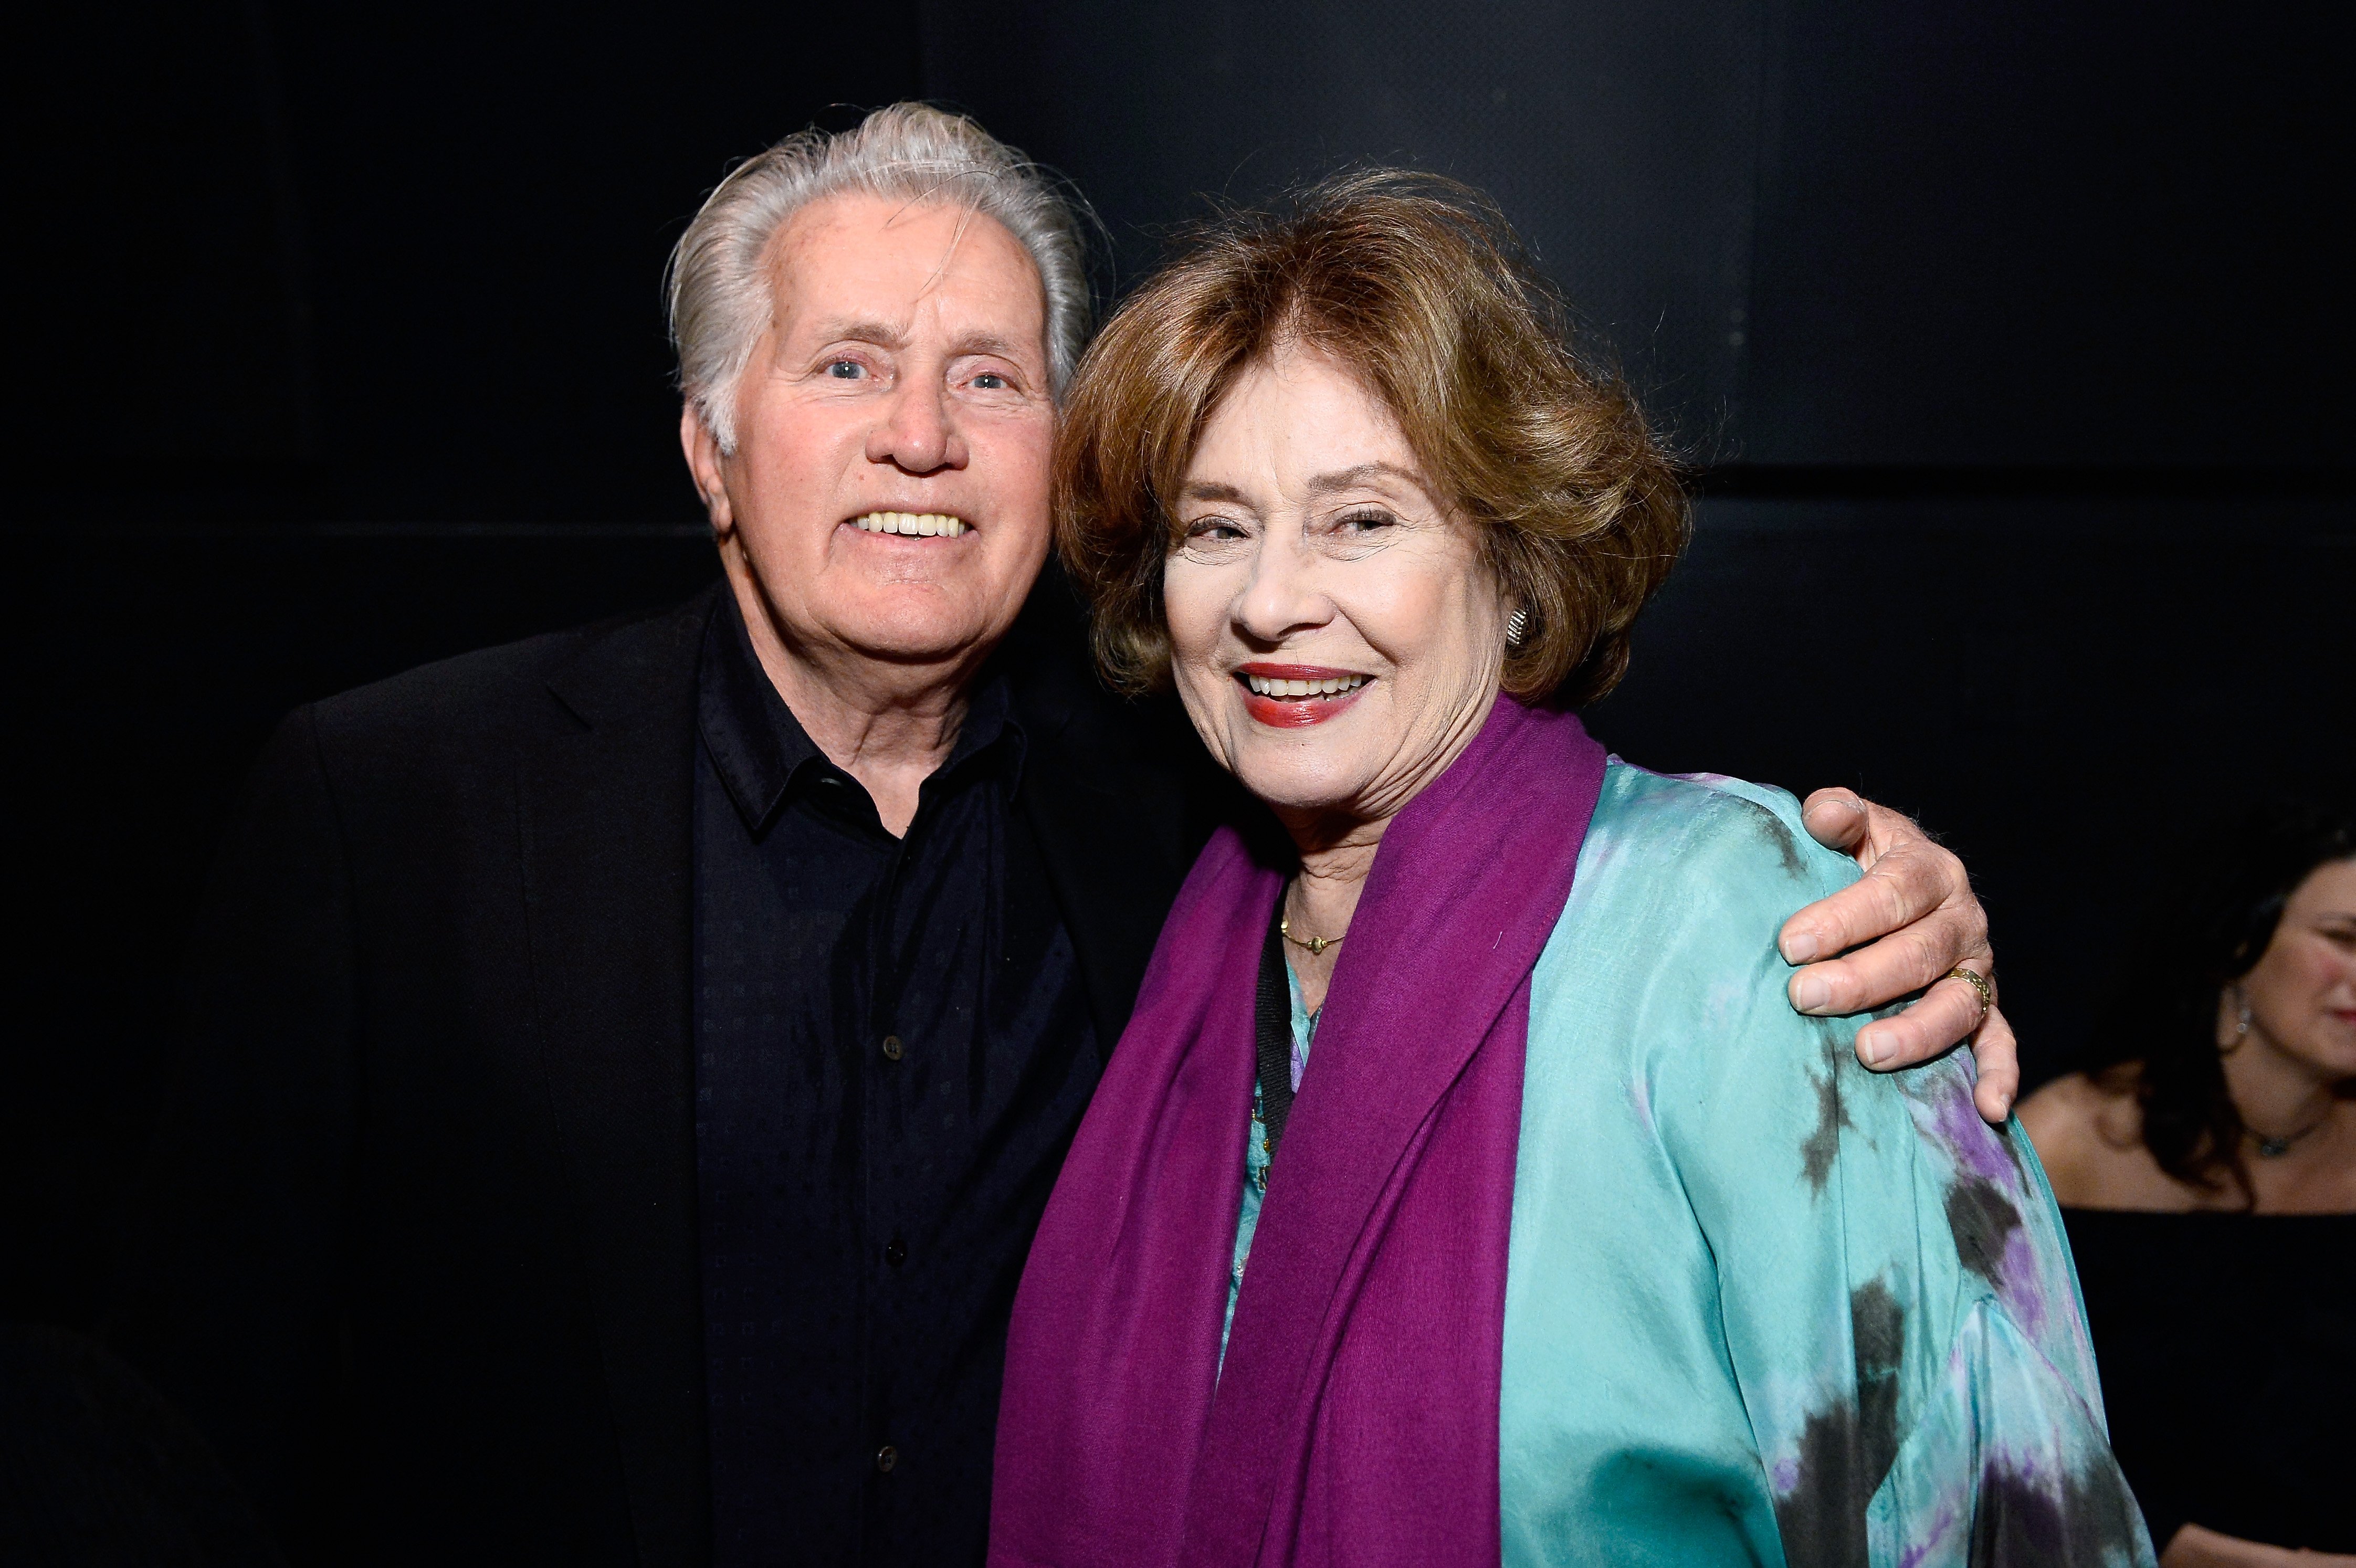 Martin Sheen and Janet Sheen seen at the screening of "The Incident" during the 2017 TCM Classic Film Festival on April 8, 2017 in Los Angeles, California. / Source: Getty Images